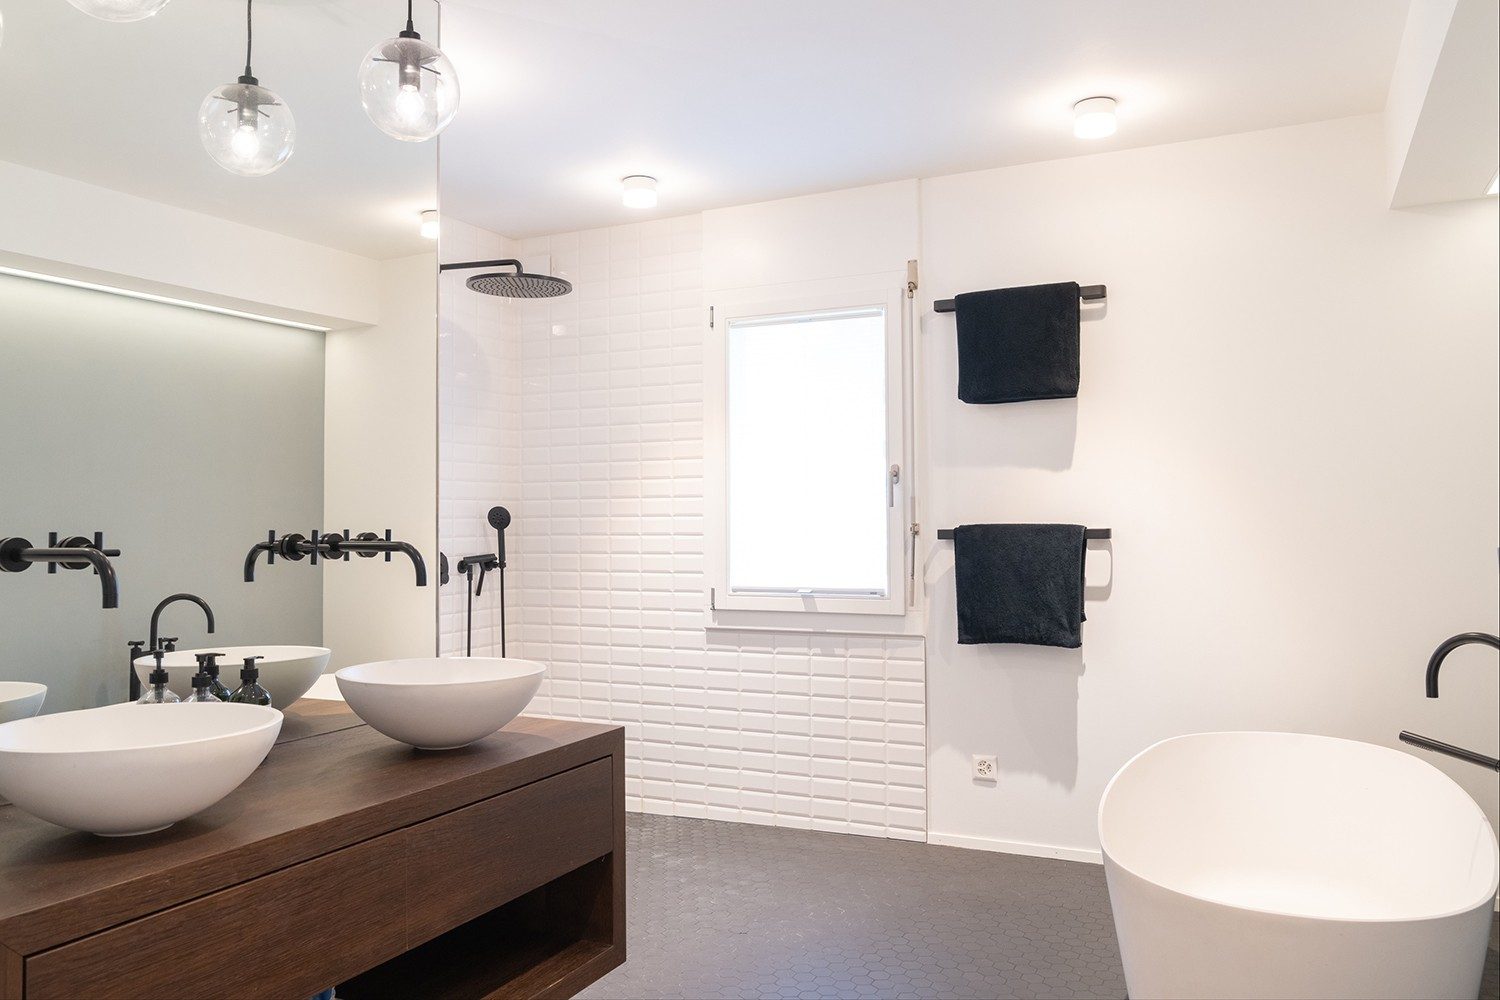 The bathroom is in plain white and black, with a beautiful wooden detail